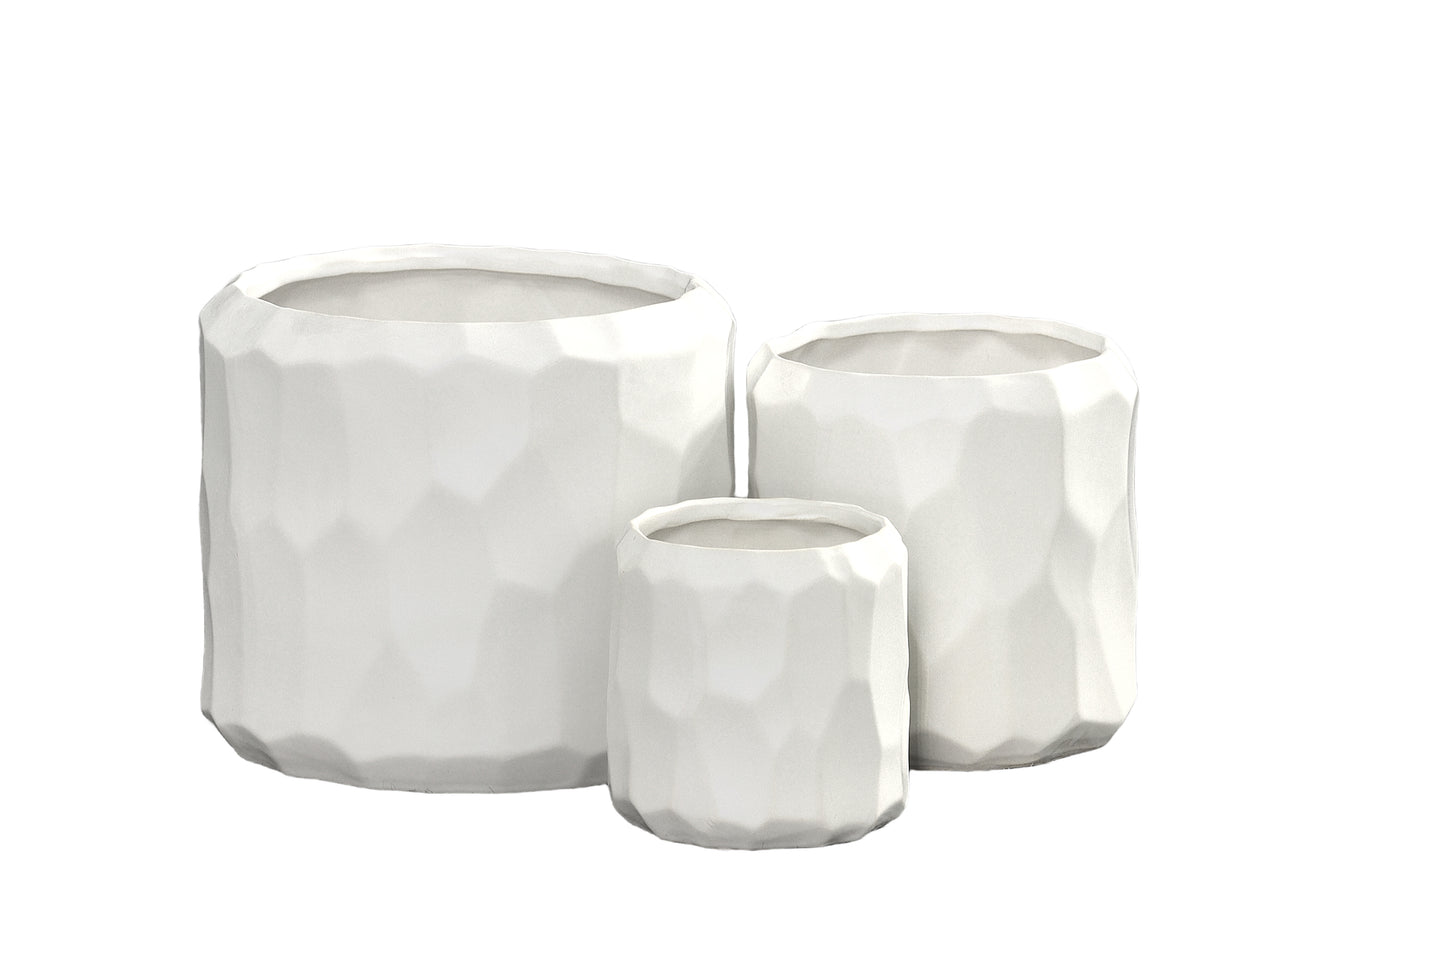 Ceramic Cylindrical Pot with Wide Mouth and Embossed Irregular Patterns Design Body, Set of 3